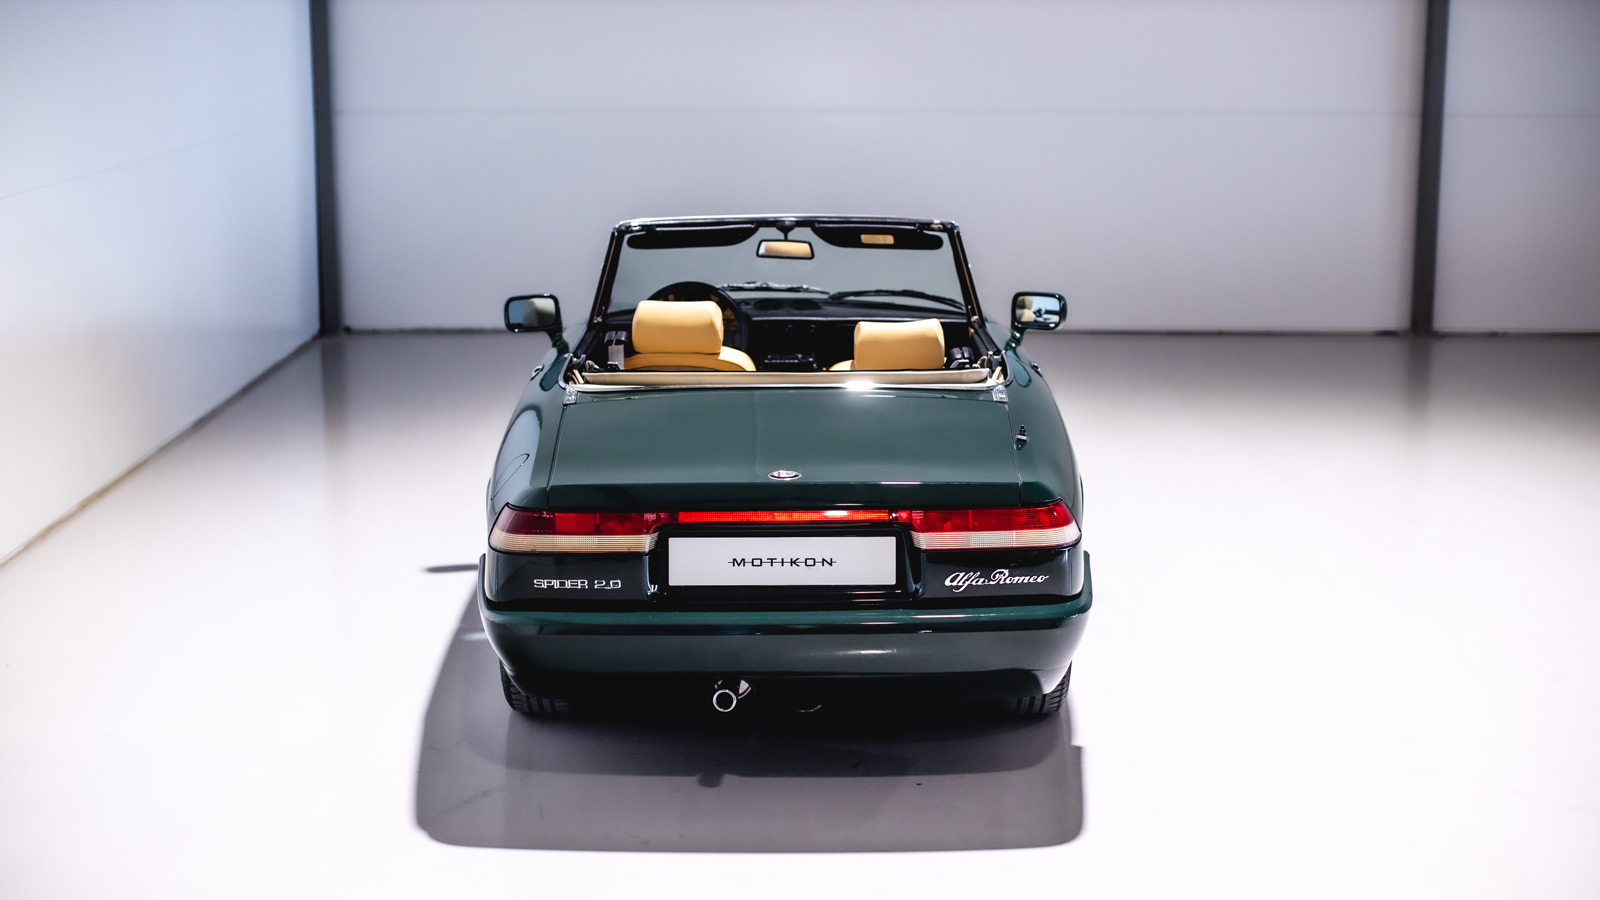 This fine example of Alfa Romeo Spider is available to view in our showroom